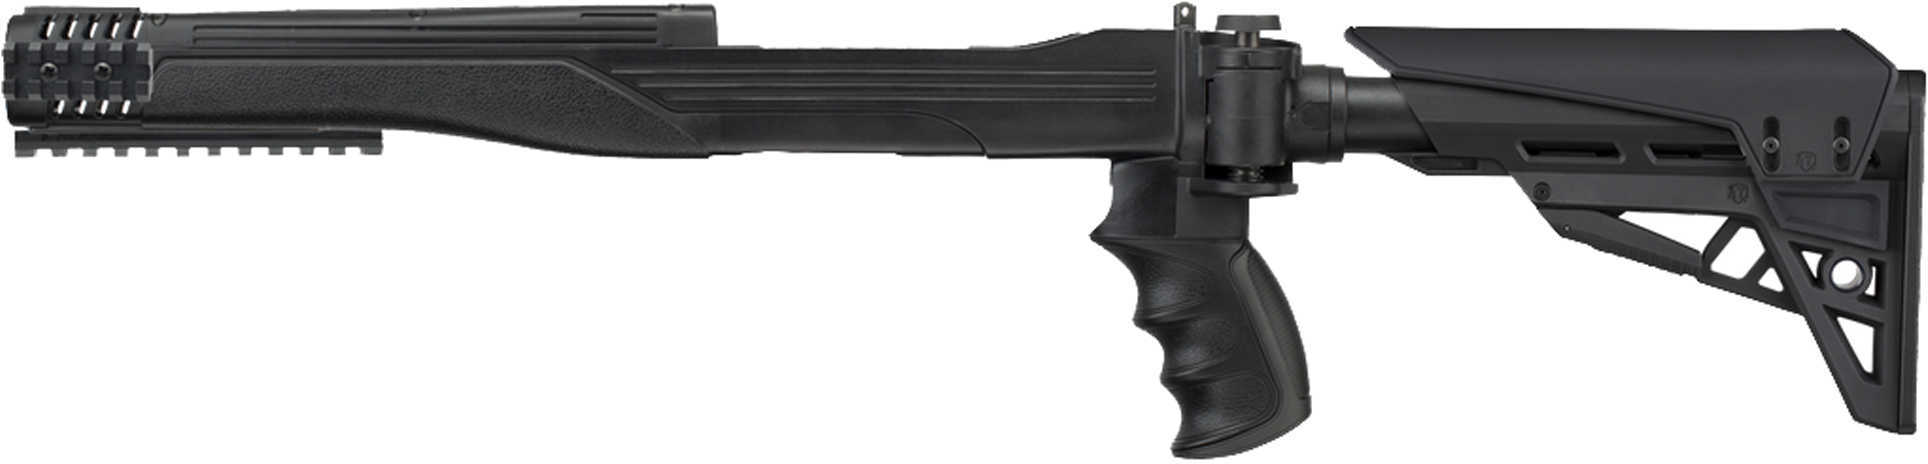 Advanced Technology Intl. ATI Ruger 10/22 TactLite Strikeforce Six Position Adjustable Side Folding Stock With Scorpion Recoil B.2.10.1216